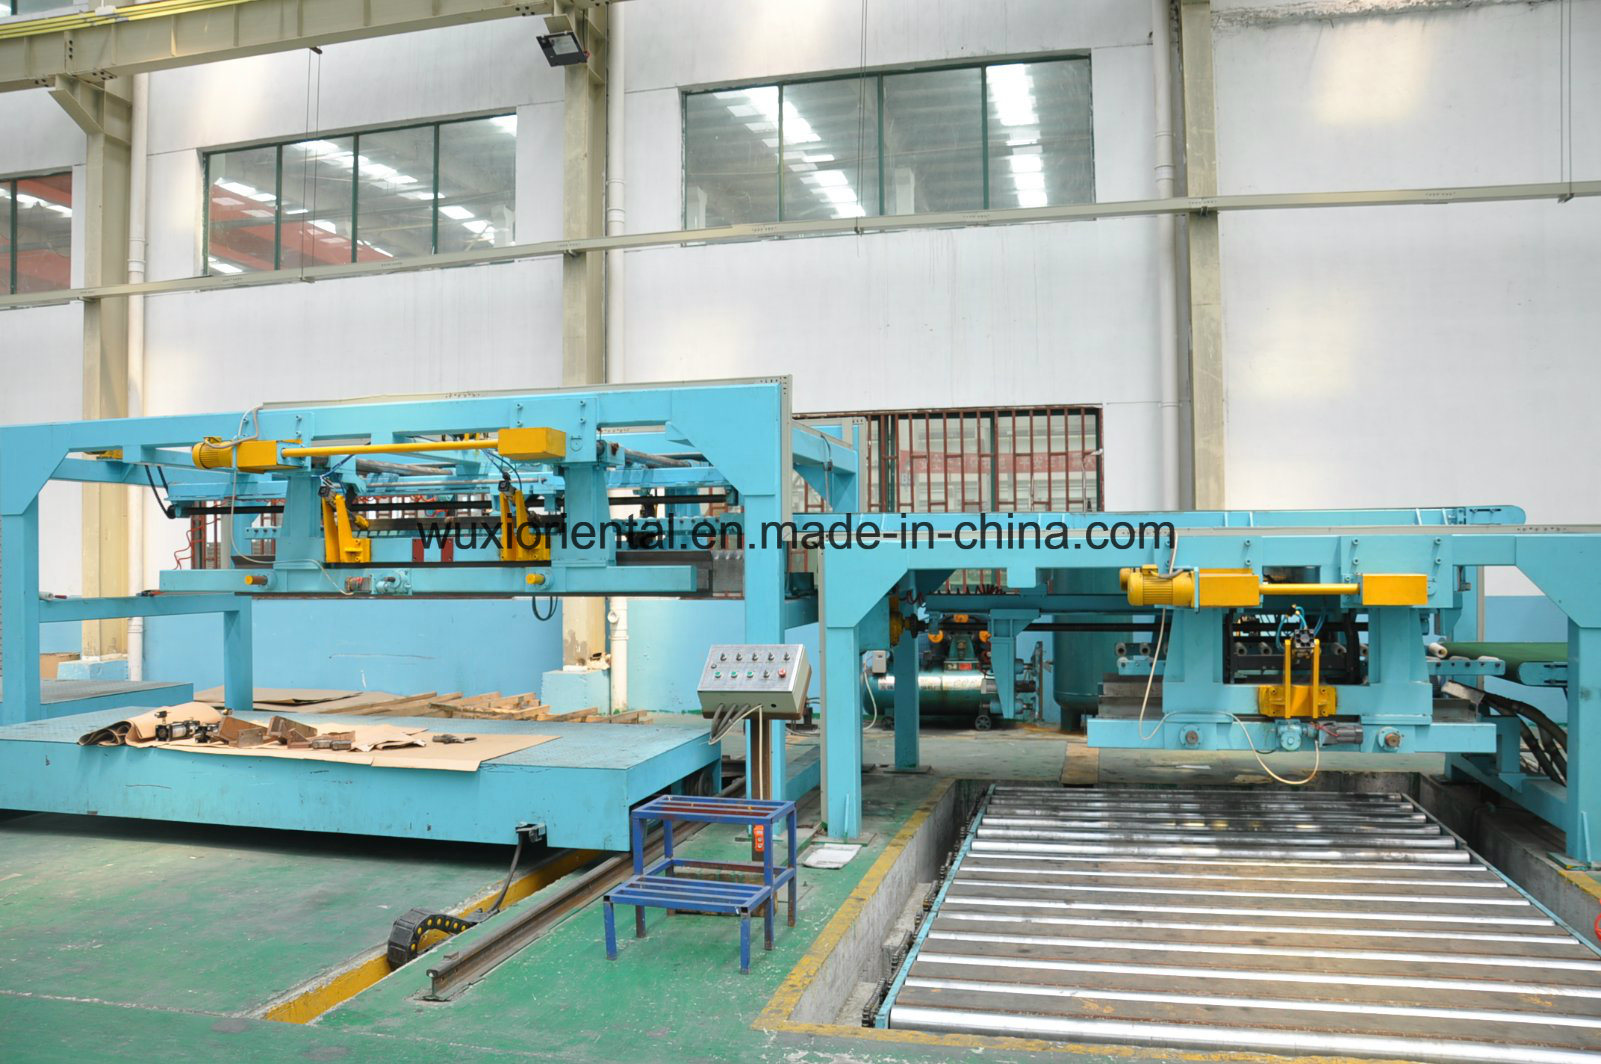 China High Speed Tracking Shear Line- Cut to Length of Cold Rolled Coils, Stainless Steel Coil, Aluminum Coil etc